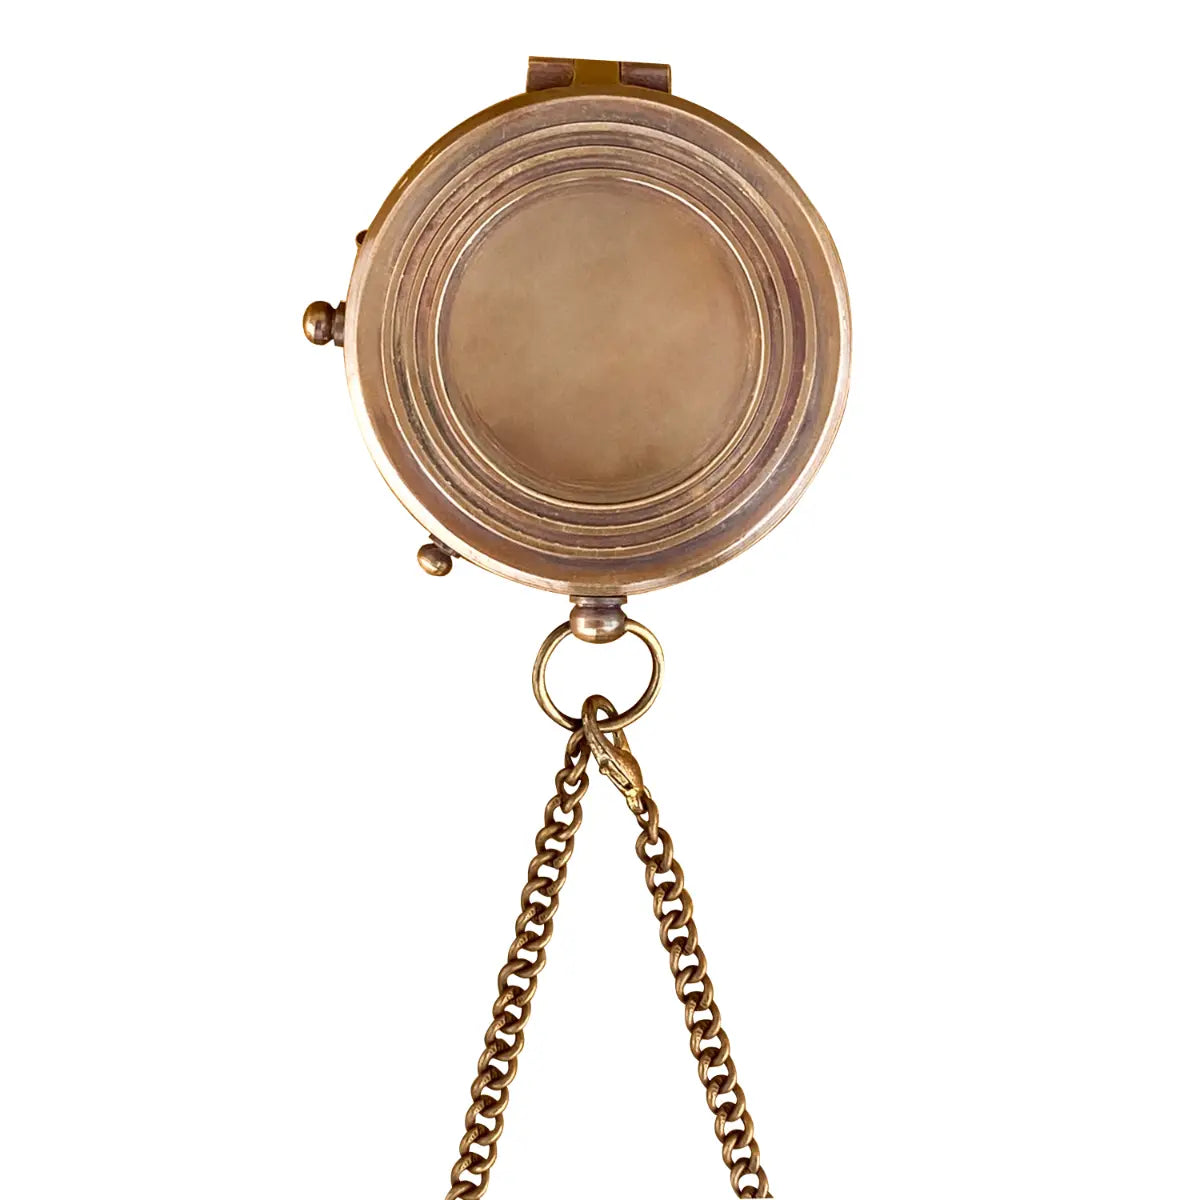 Flat Brass Compass For Gifts FBC108